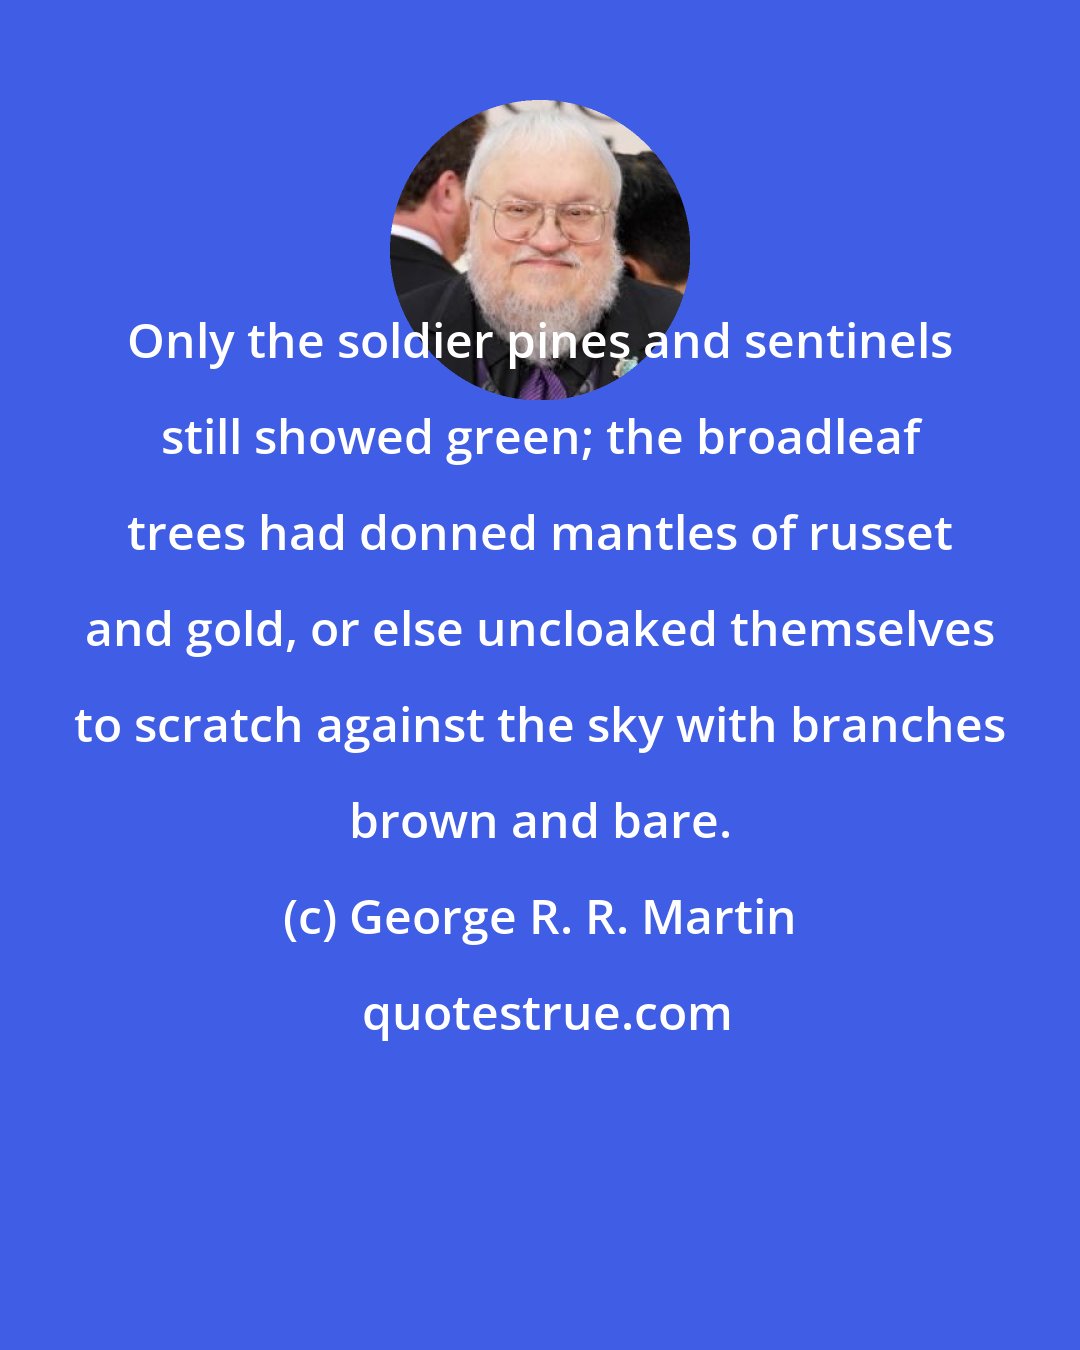 George R. R. Martin: Only the soldier pines and sentinels still showed green; the broadleaf trees had donned mantles of russet and gold, or else uncloaked themselves to scratch against the sky with branches brown and bare.